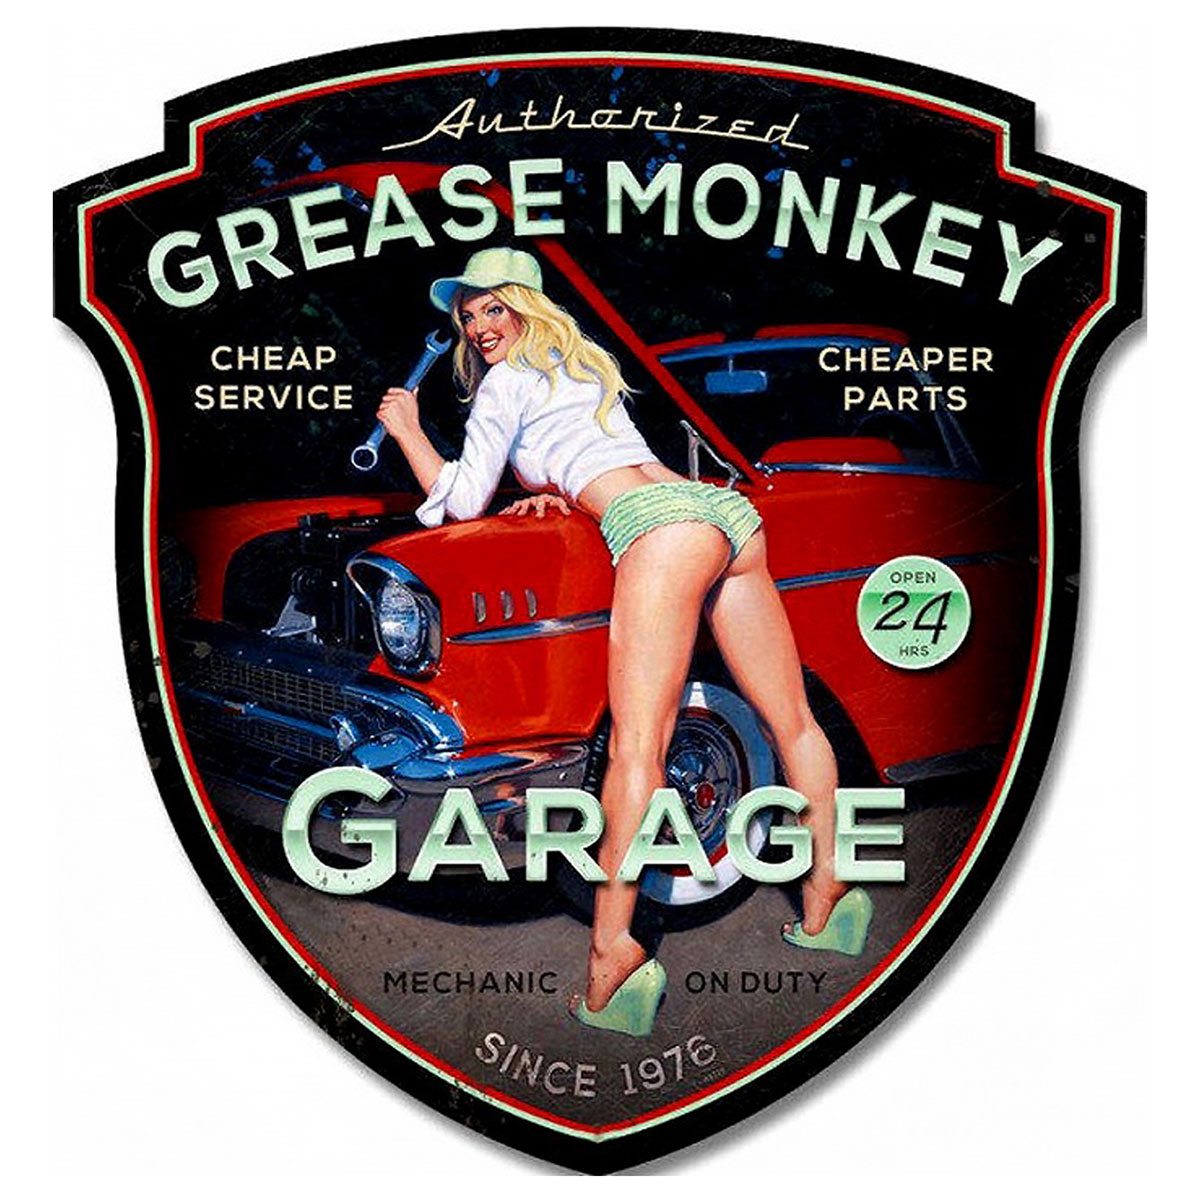 Ecusson grease monkey pin up